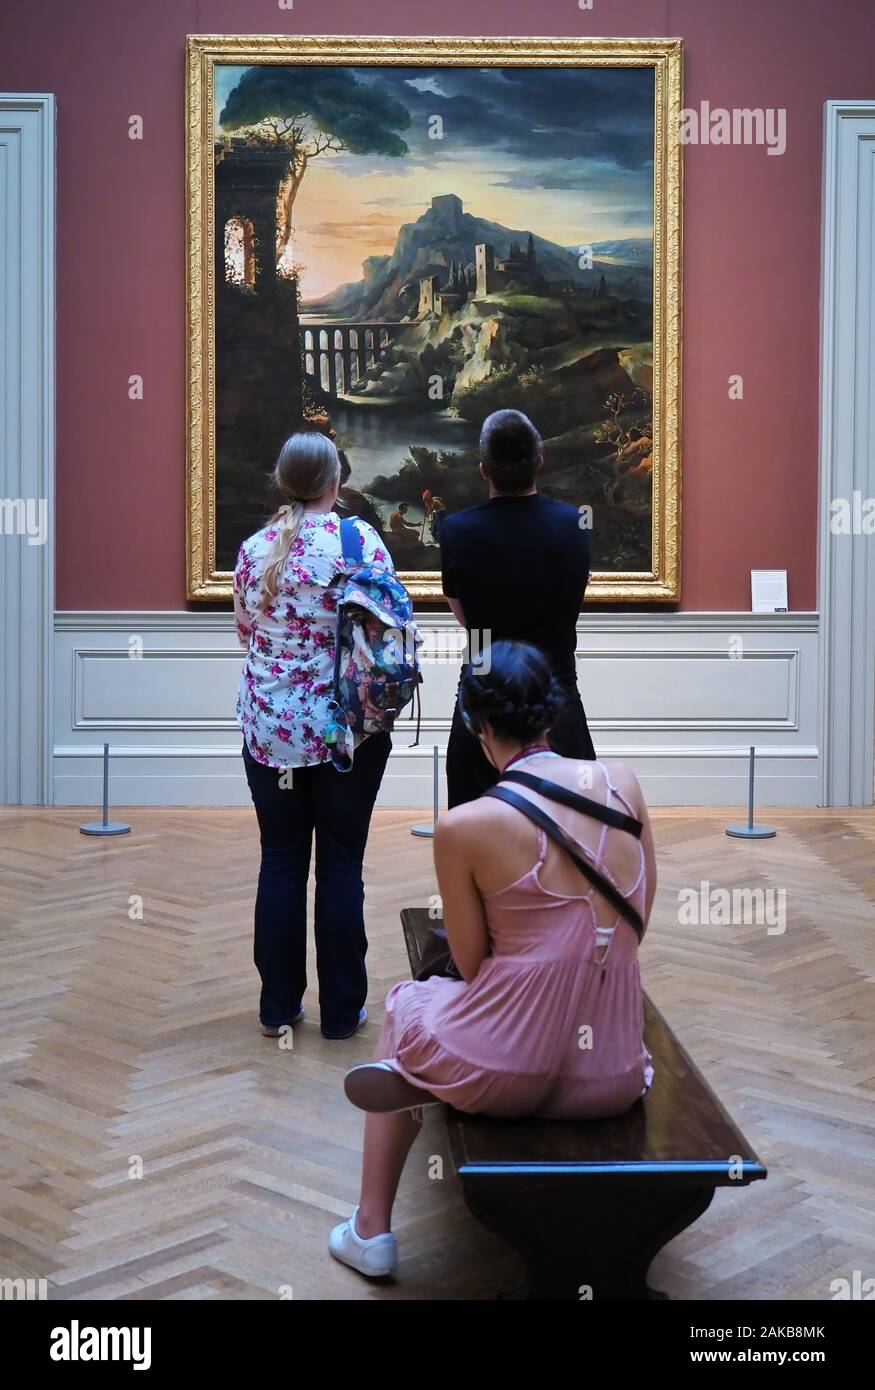 New York City, NY USA. Jul 2017. Focused painting being viewed by some museum visitors at The MET. Stock Photo